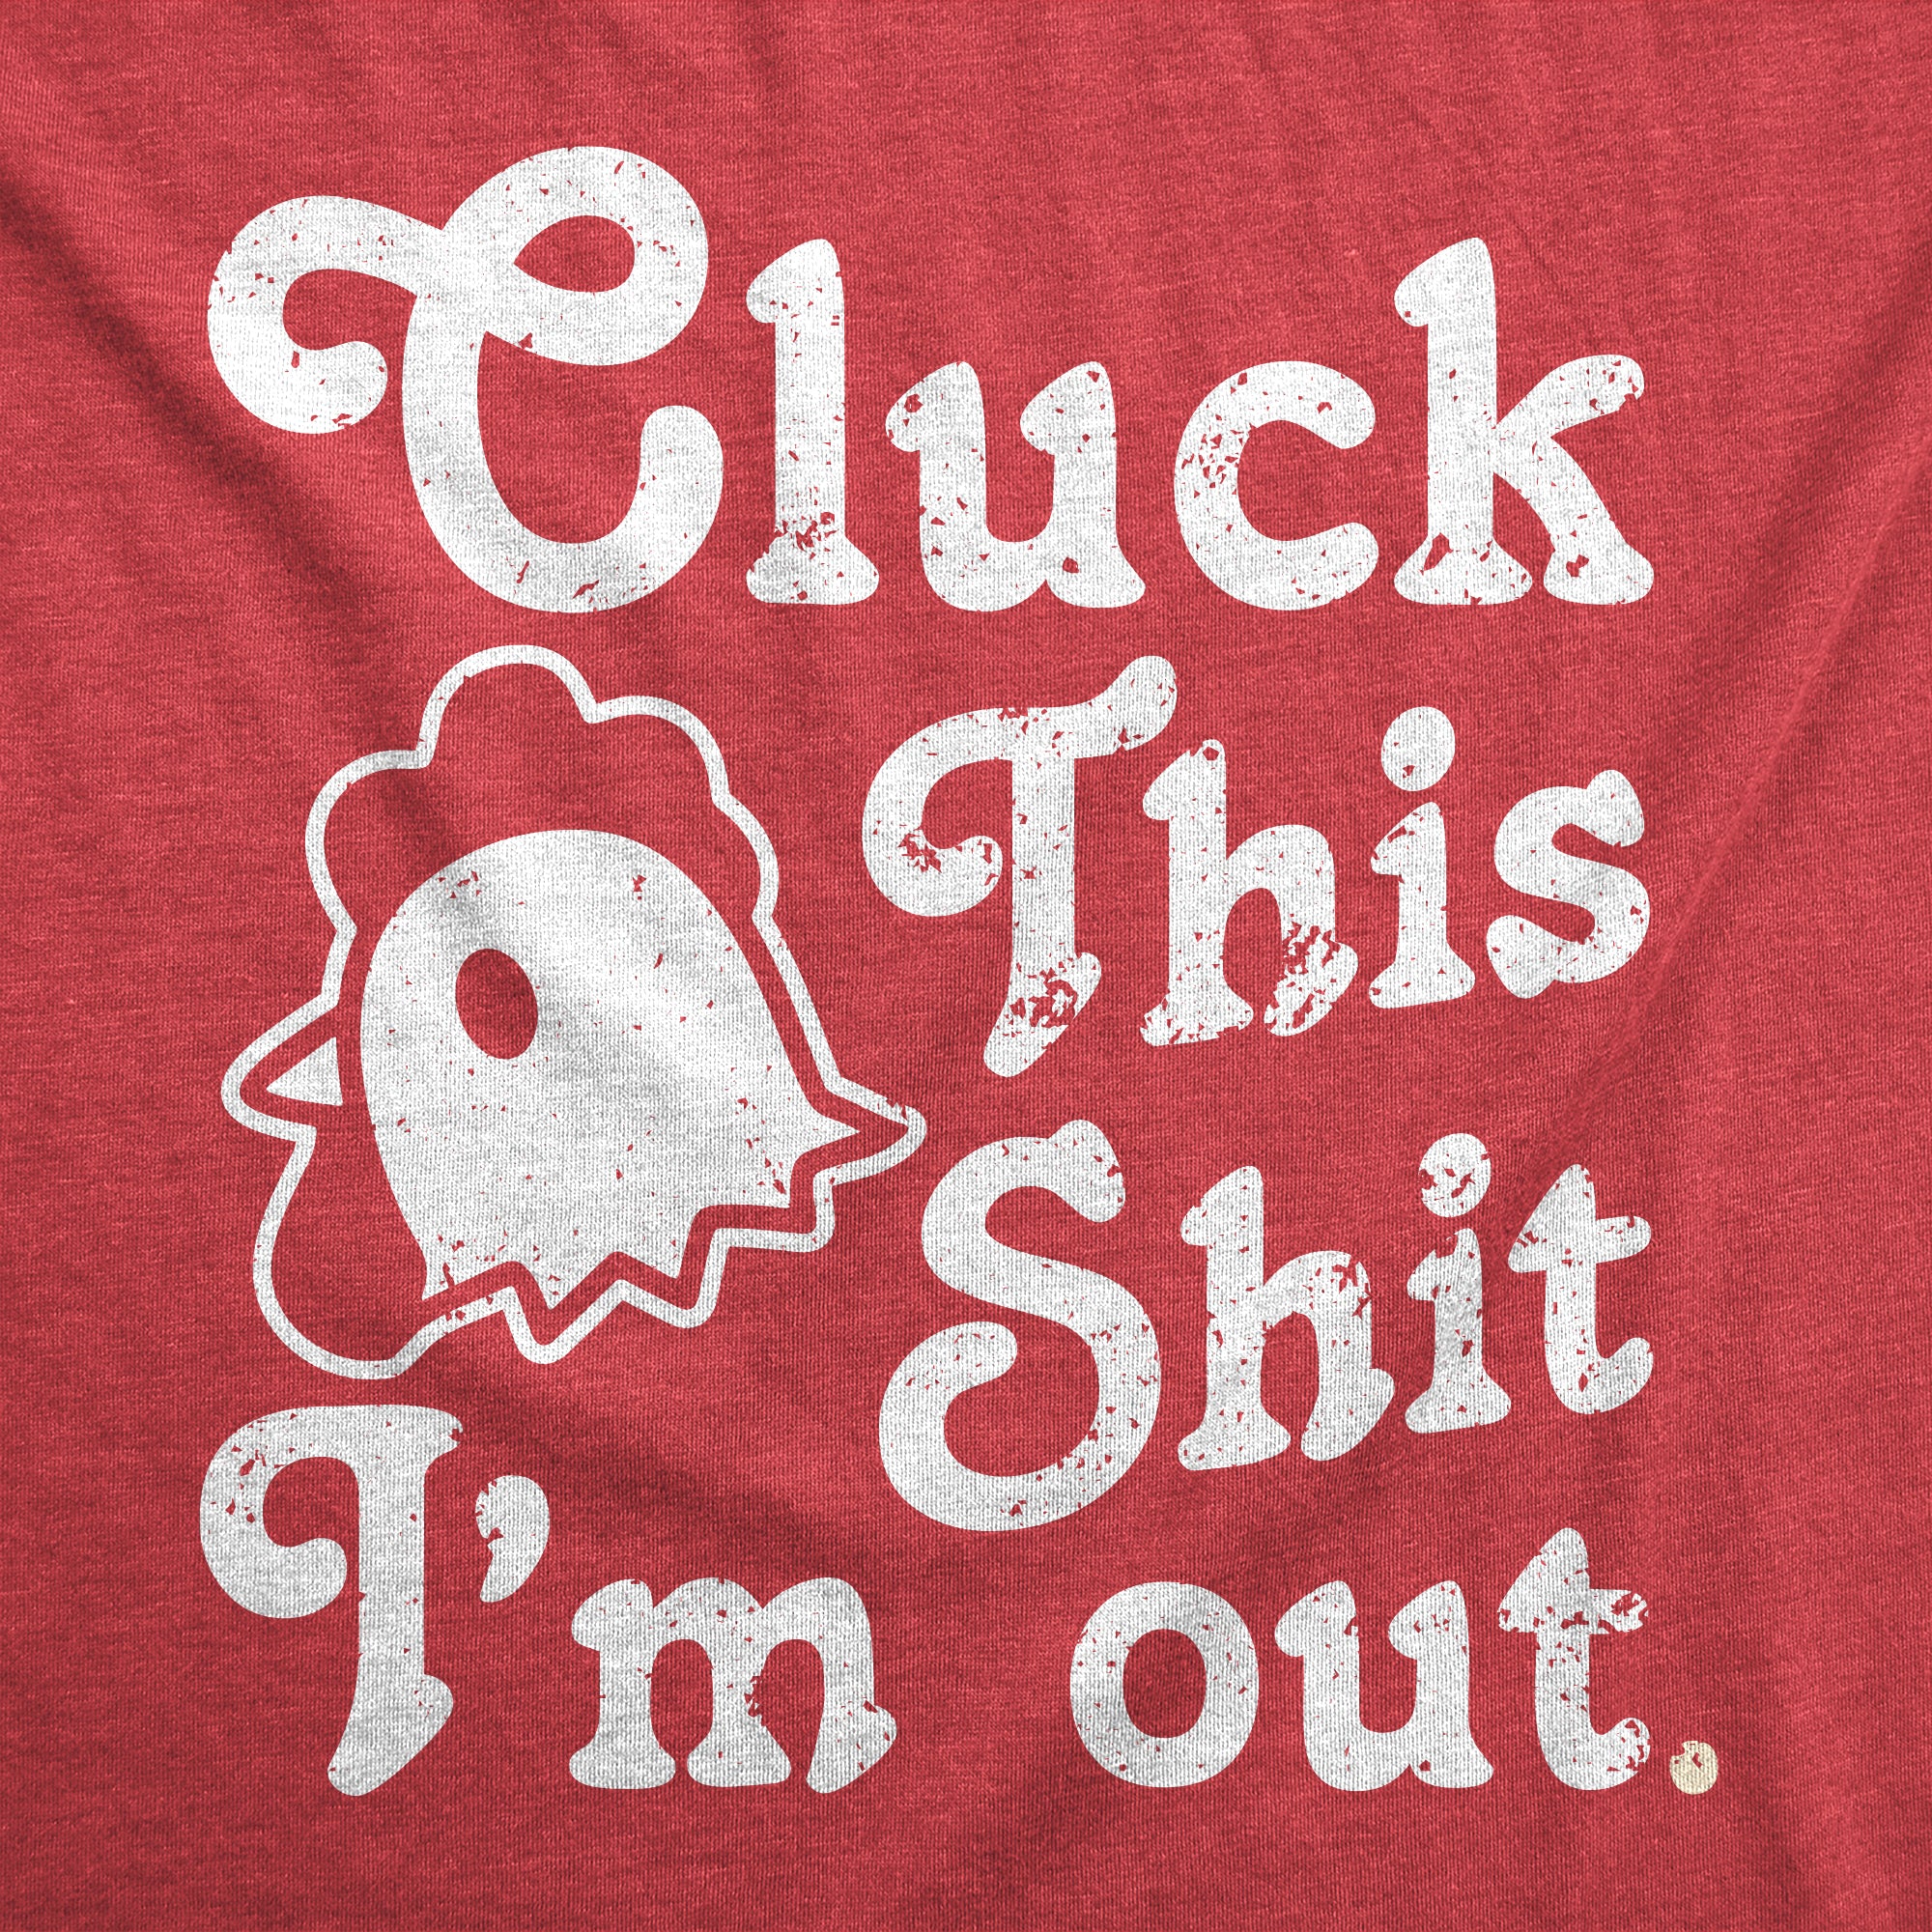 Funny Heather Red - Cluck Cluck This Shit Im Out Mens T Shirt Nerdy animal Sarcastic Tee